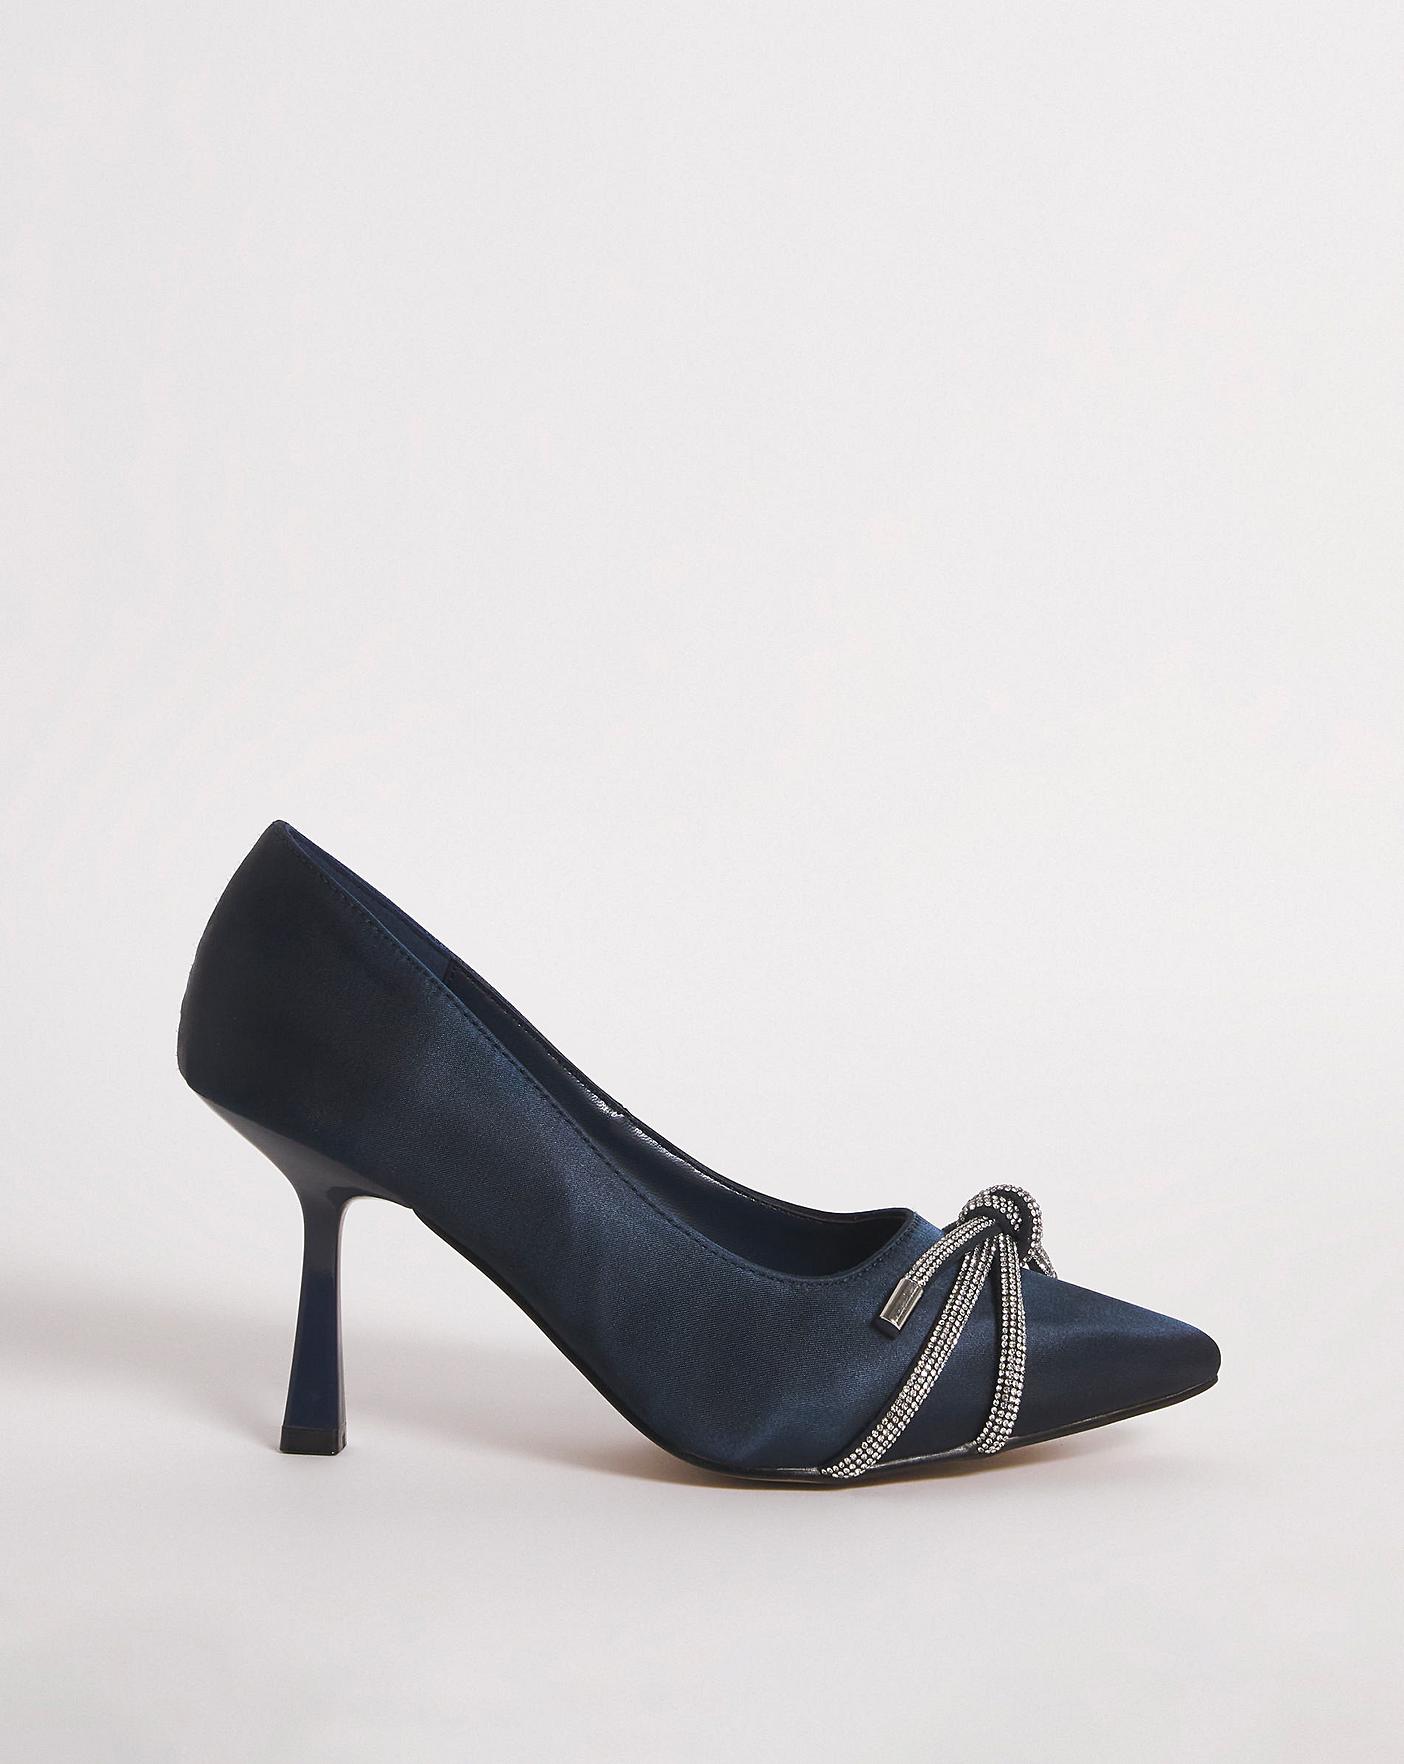 Gabor Brambling Wide Fit Leather Court Shoes, Black at John Lewis & Partners